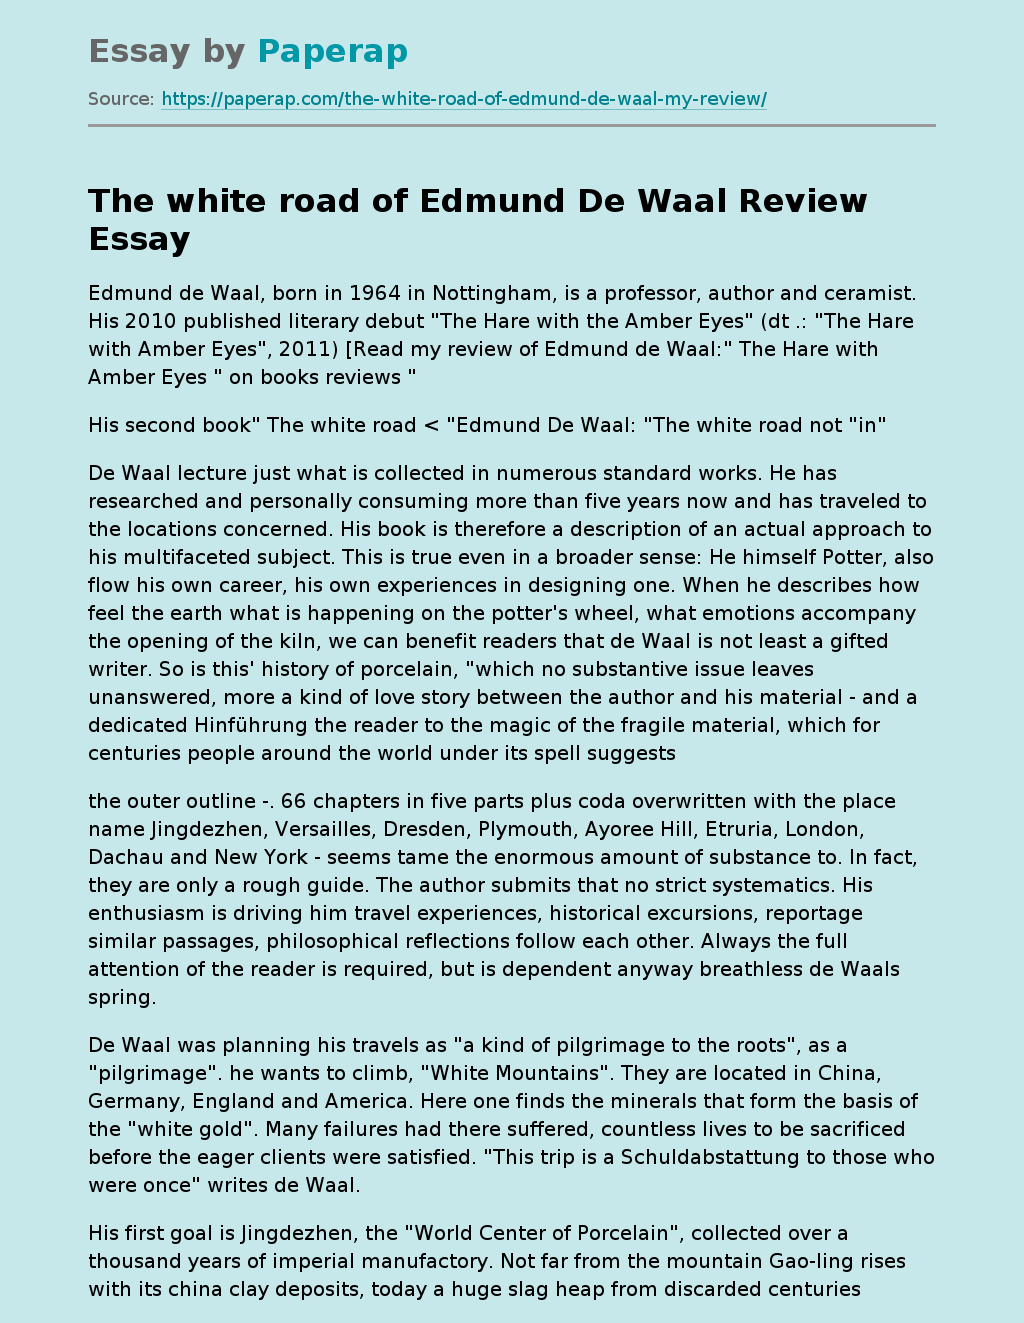 The White Road of Edmund De Waal Review